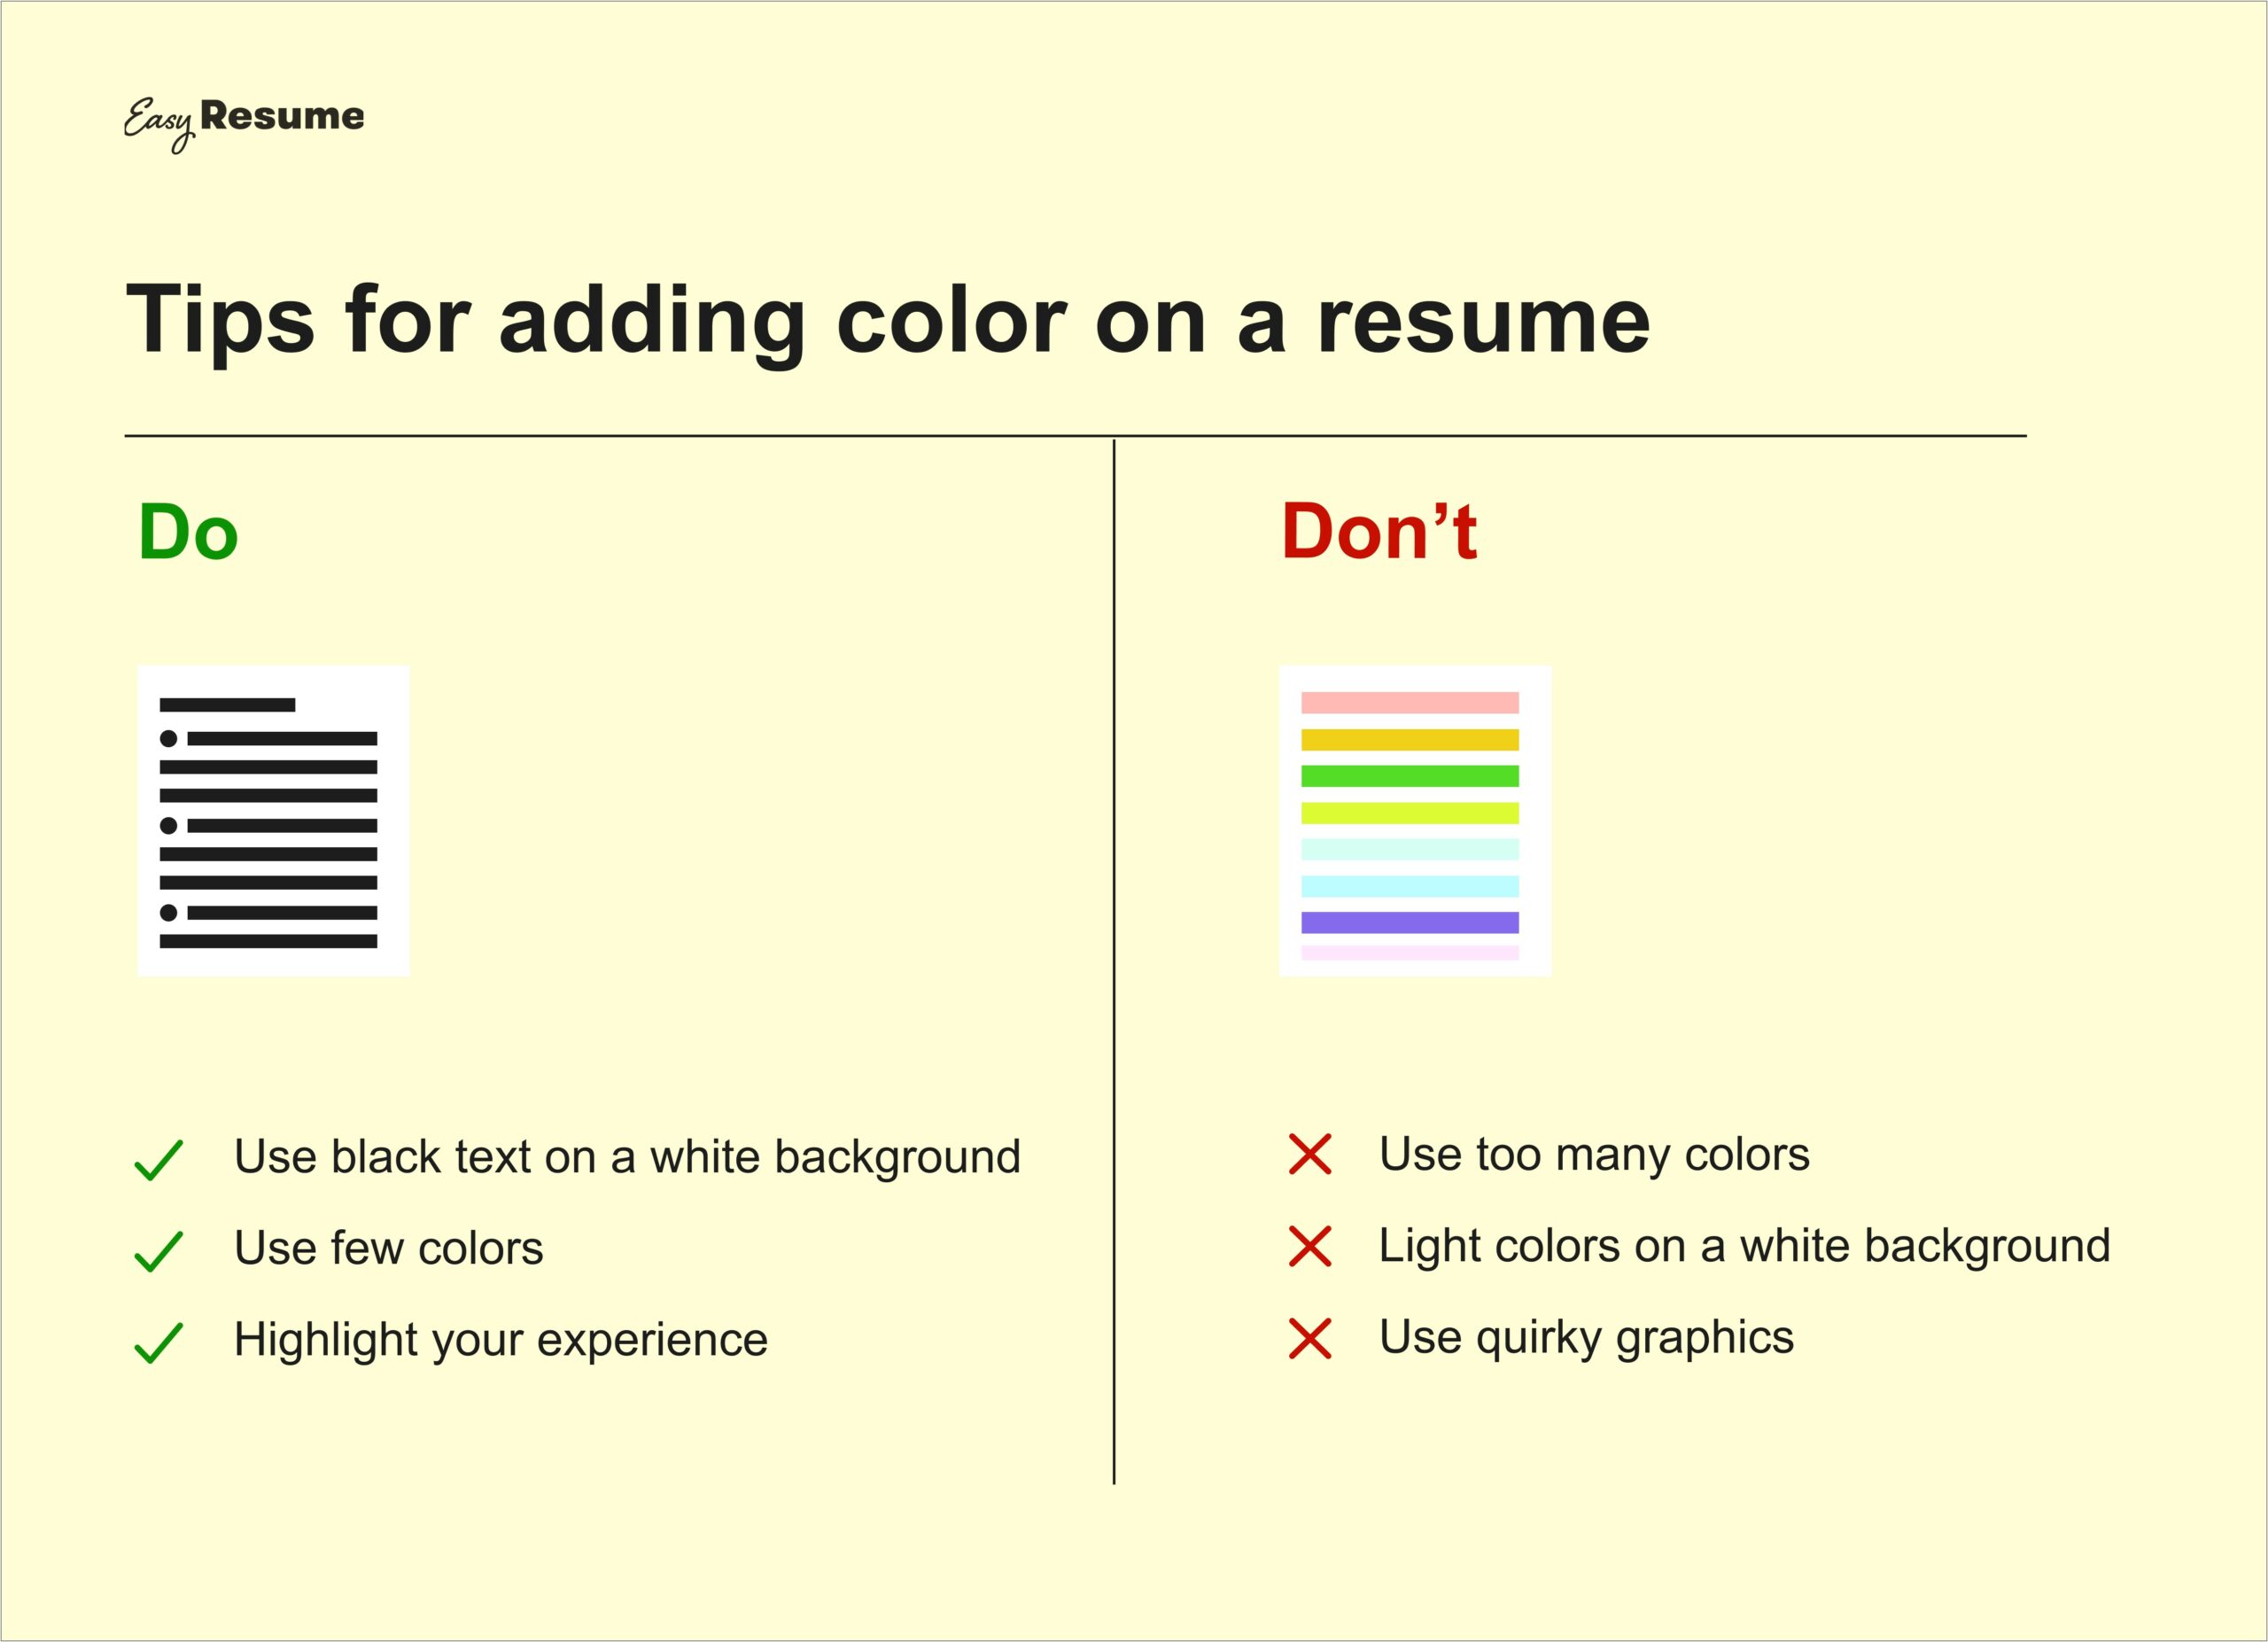 Color In Resumes Good Or Bad